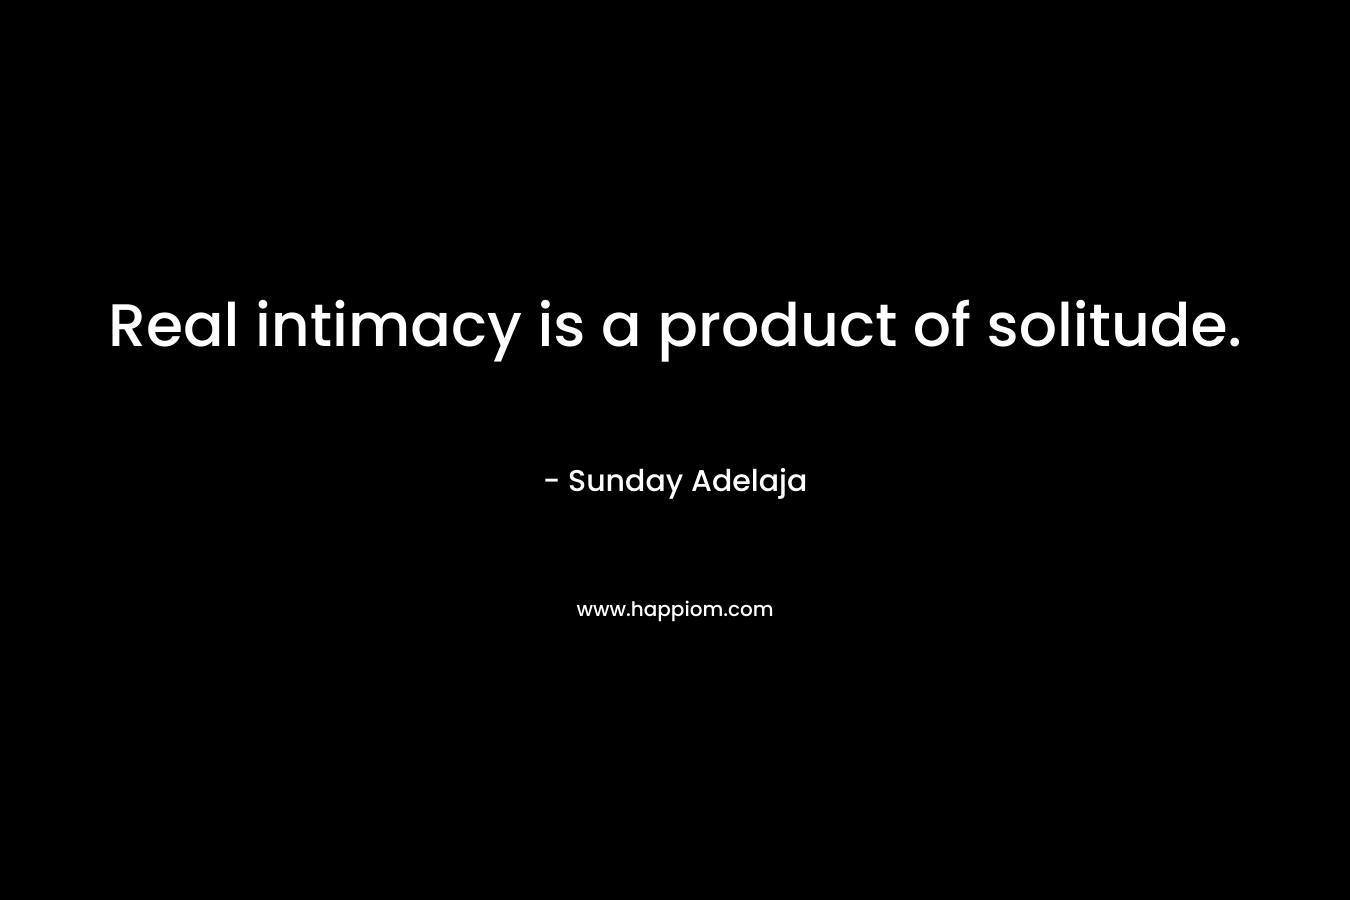 Real intimacy is a product of solitude.